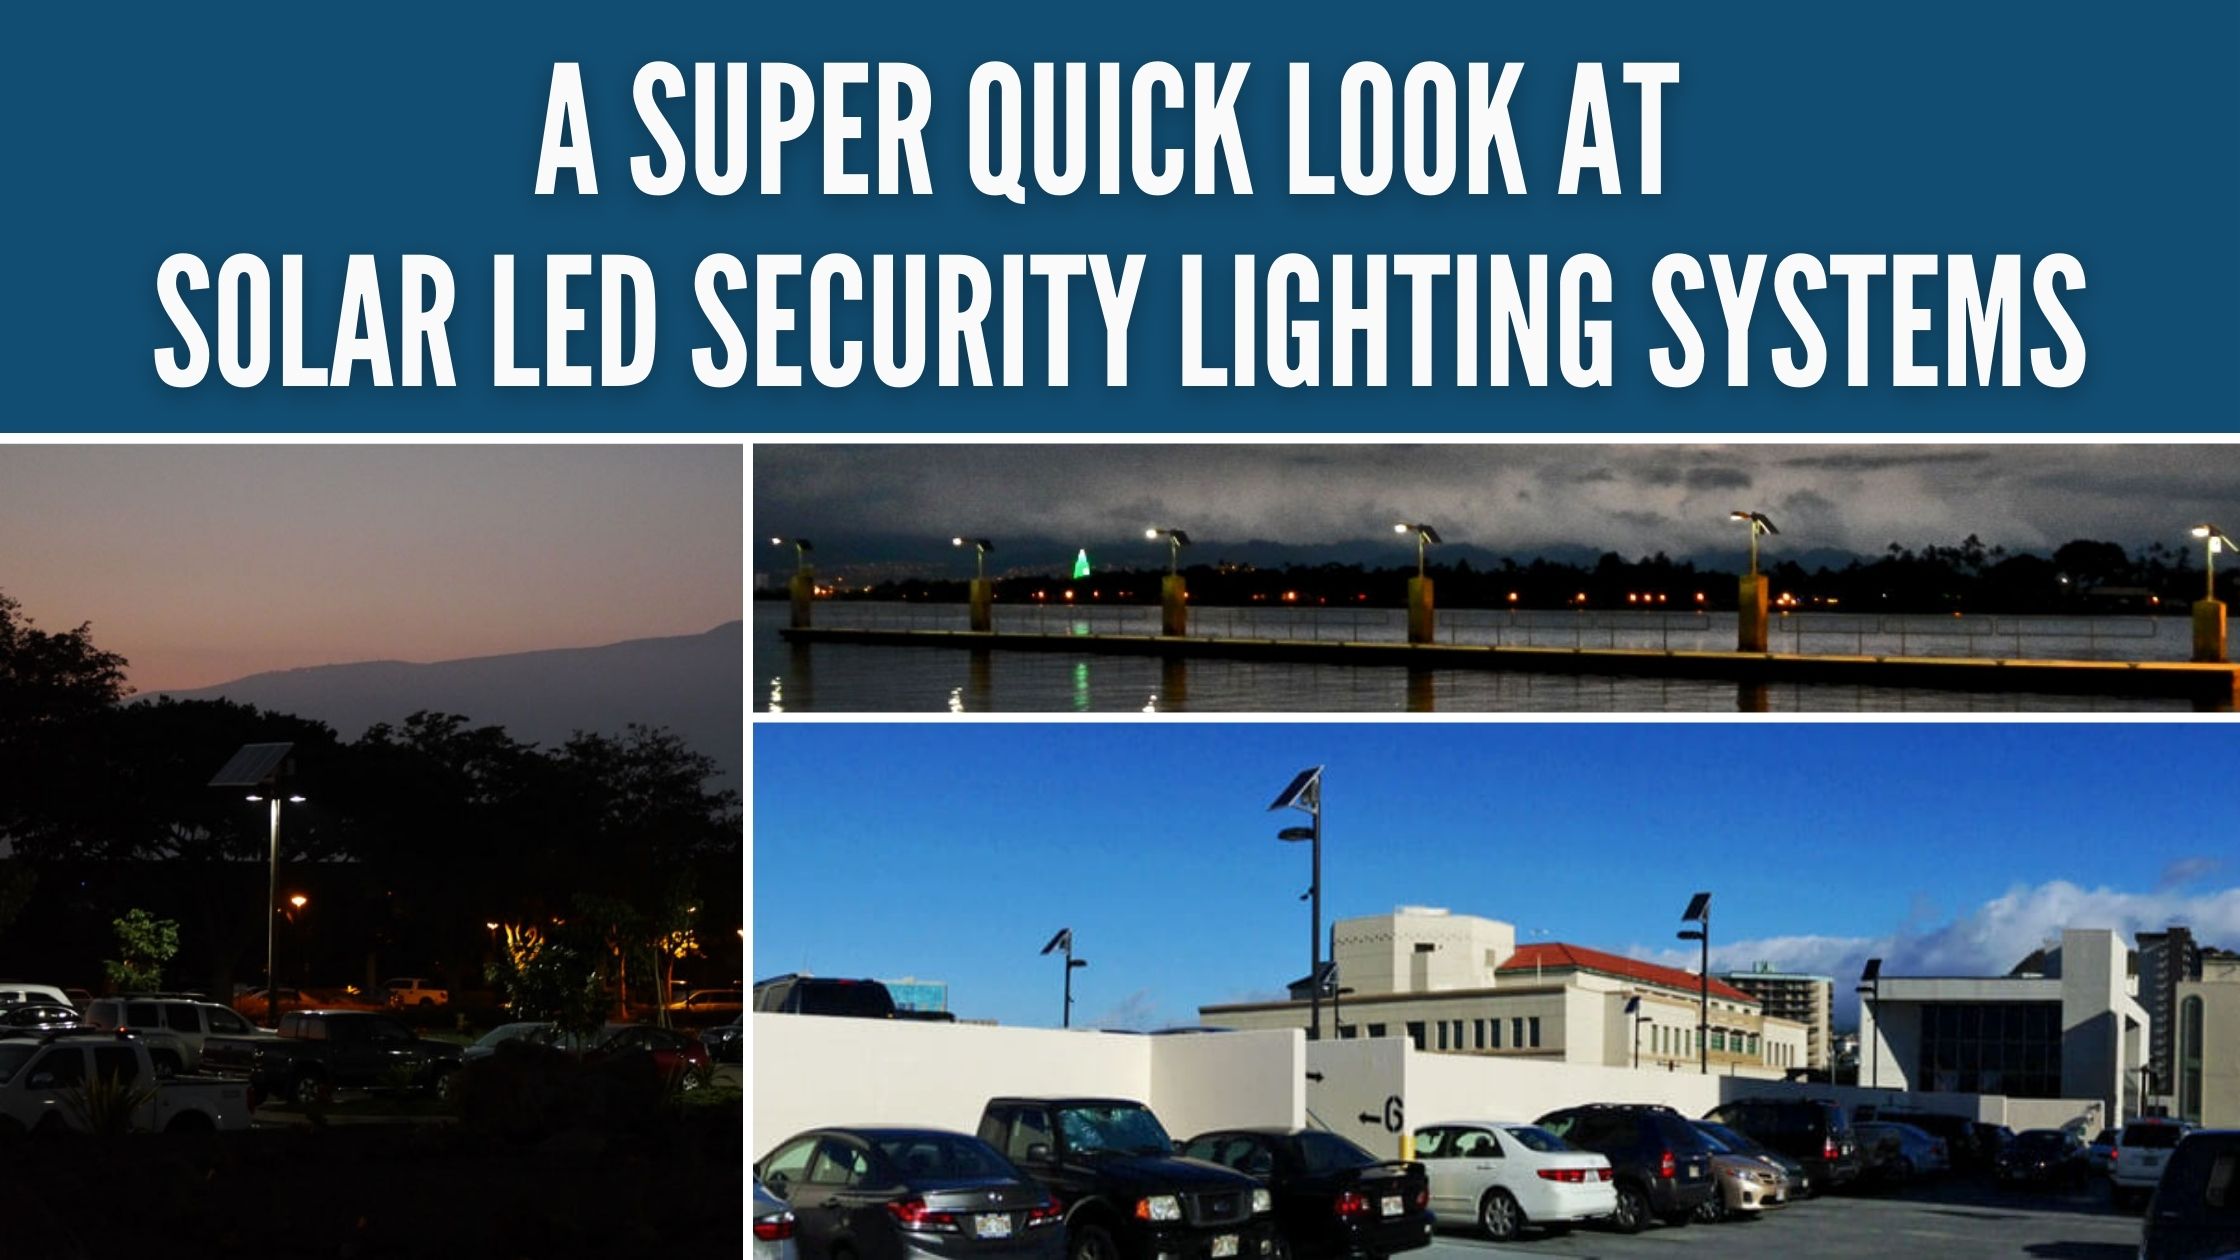 A Super Quick Look at Solar LED Security Lighting Systems